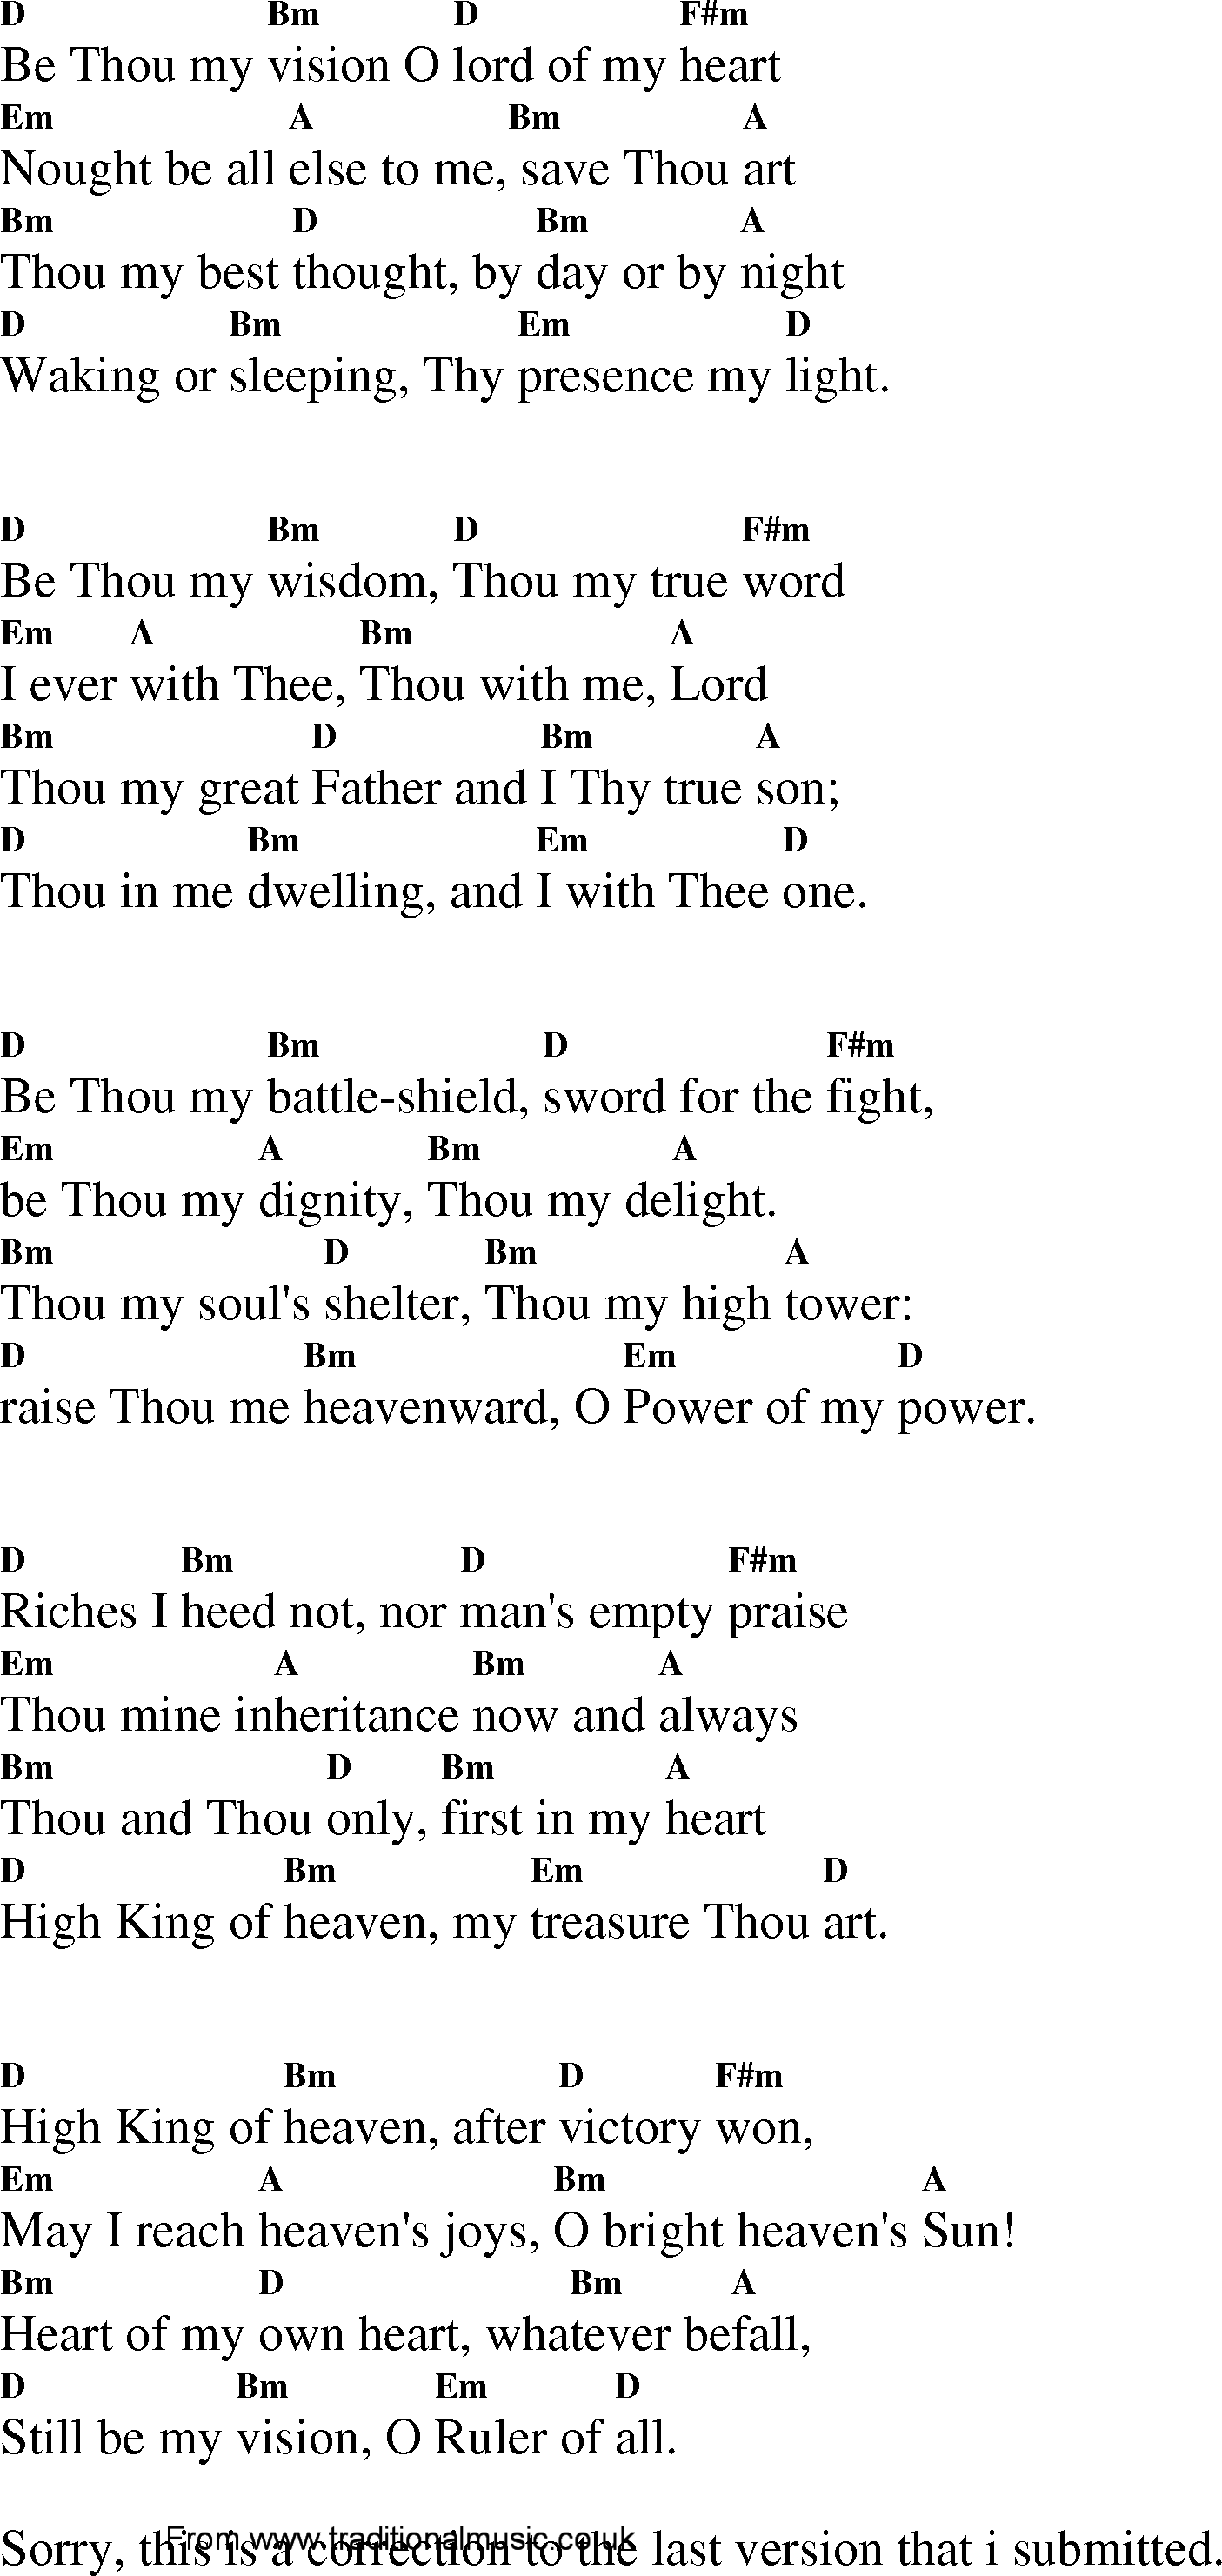 Gospel Song: be_thou_my_vision, lyrics and chords.